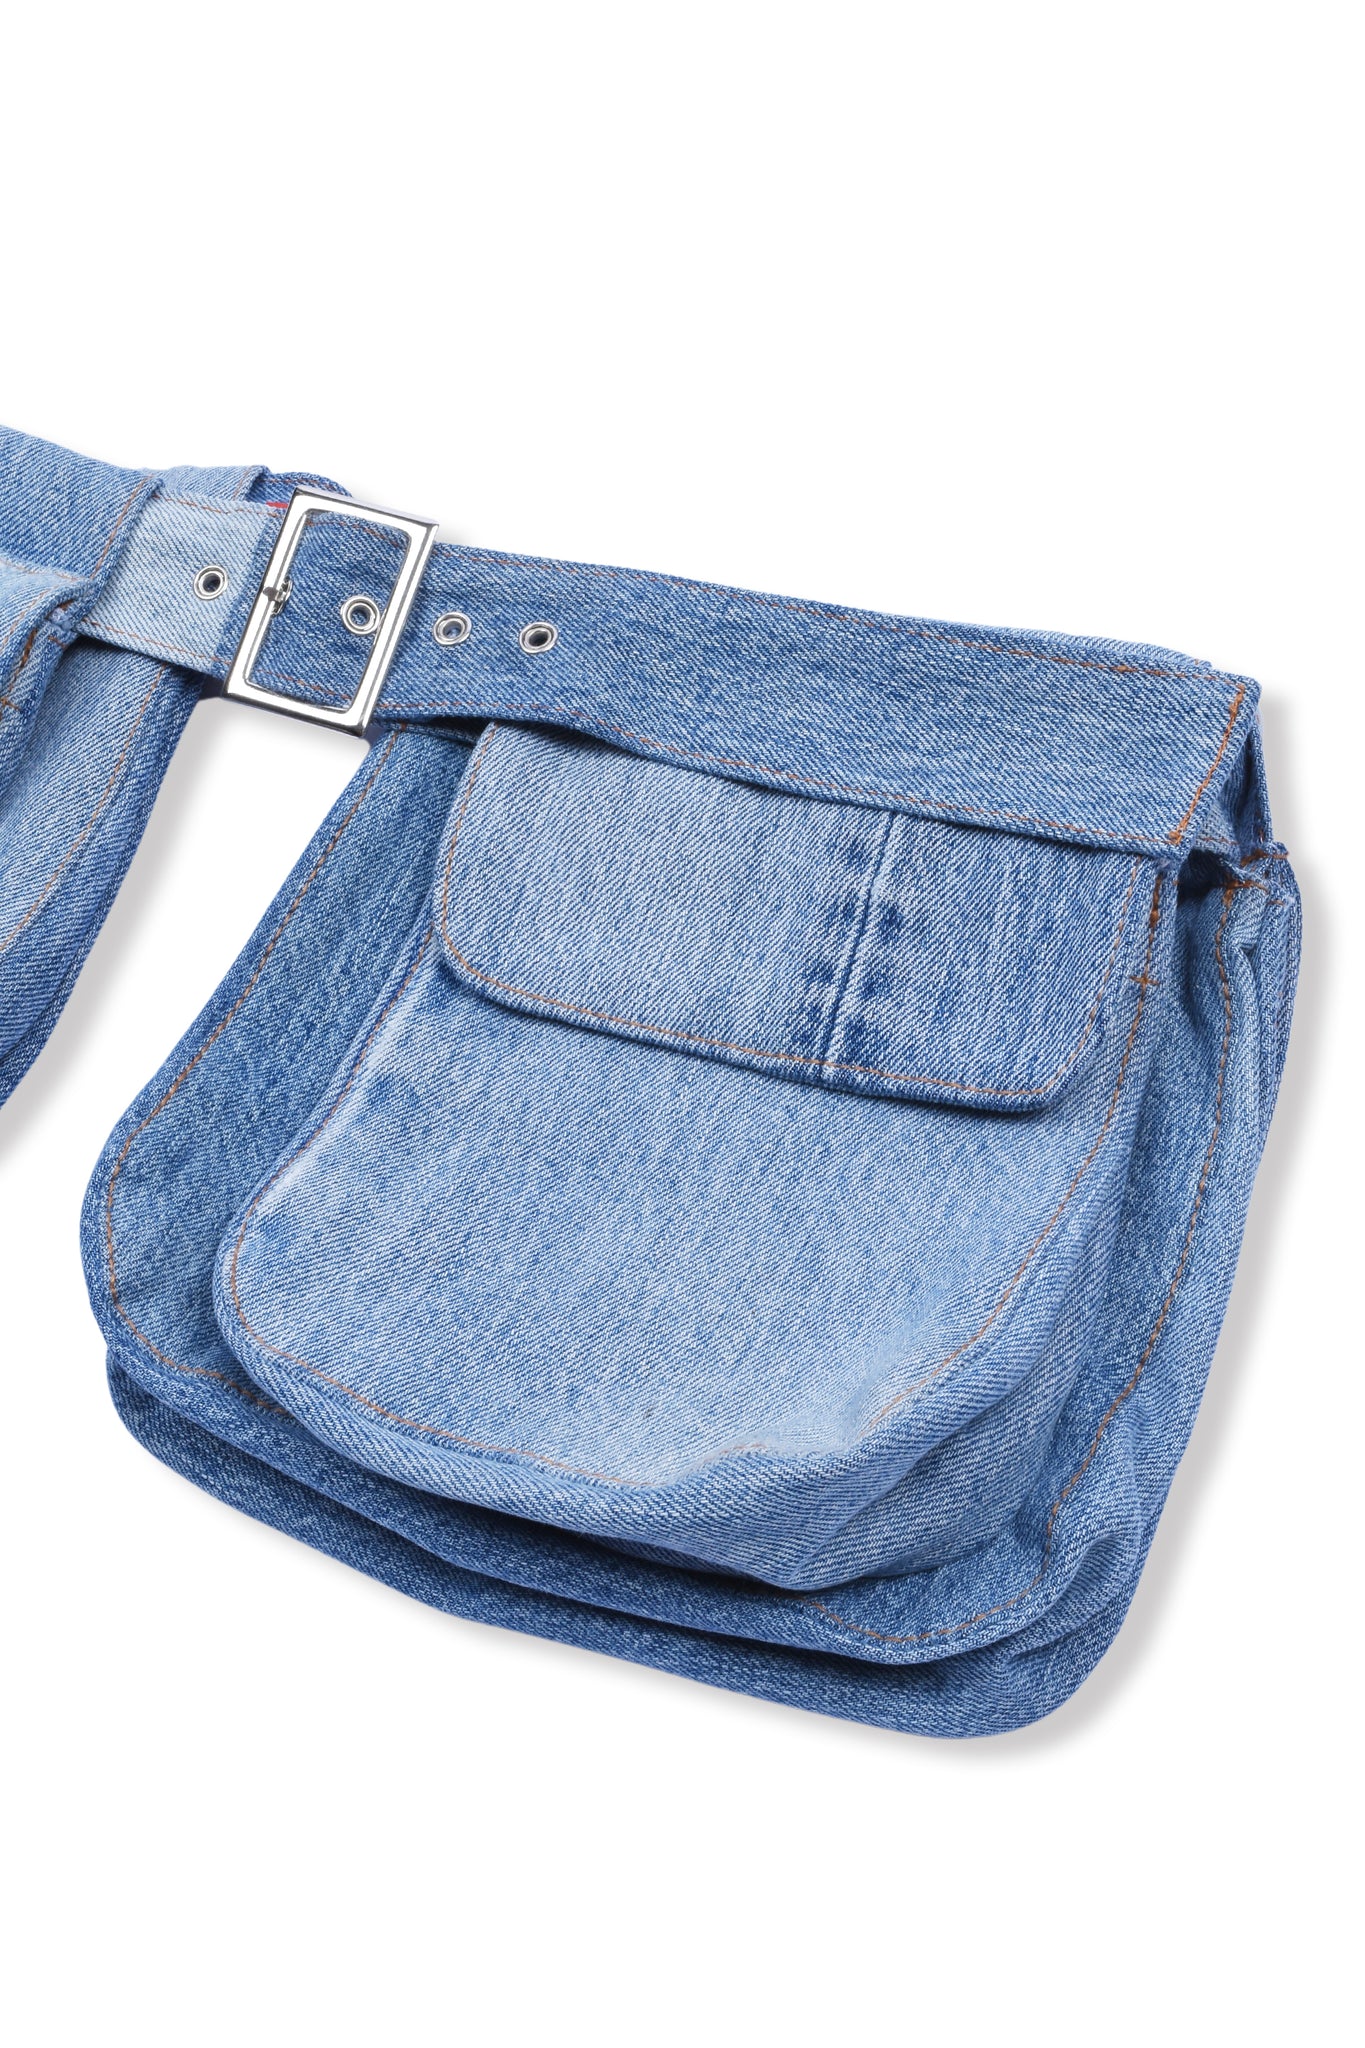 ONE-OFF PATCHWORKED DENIM WEST BAG